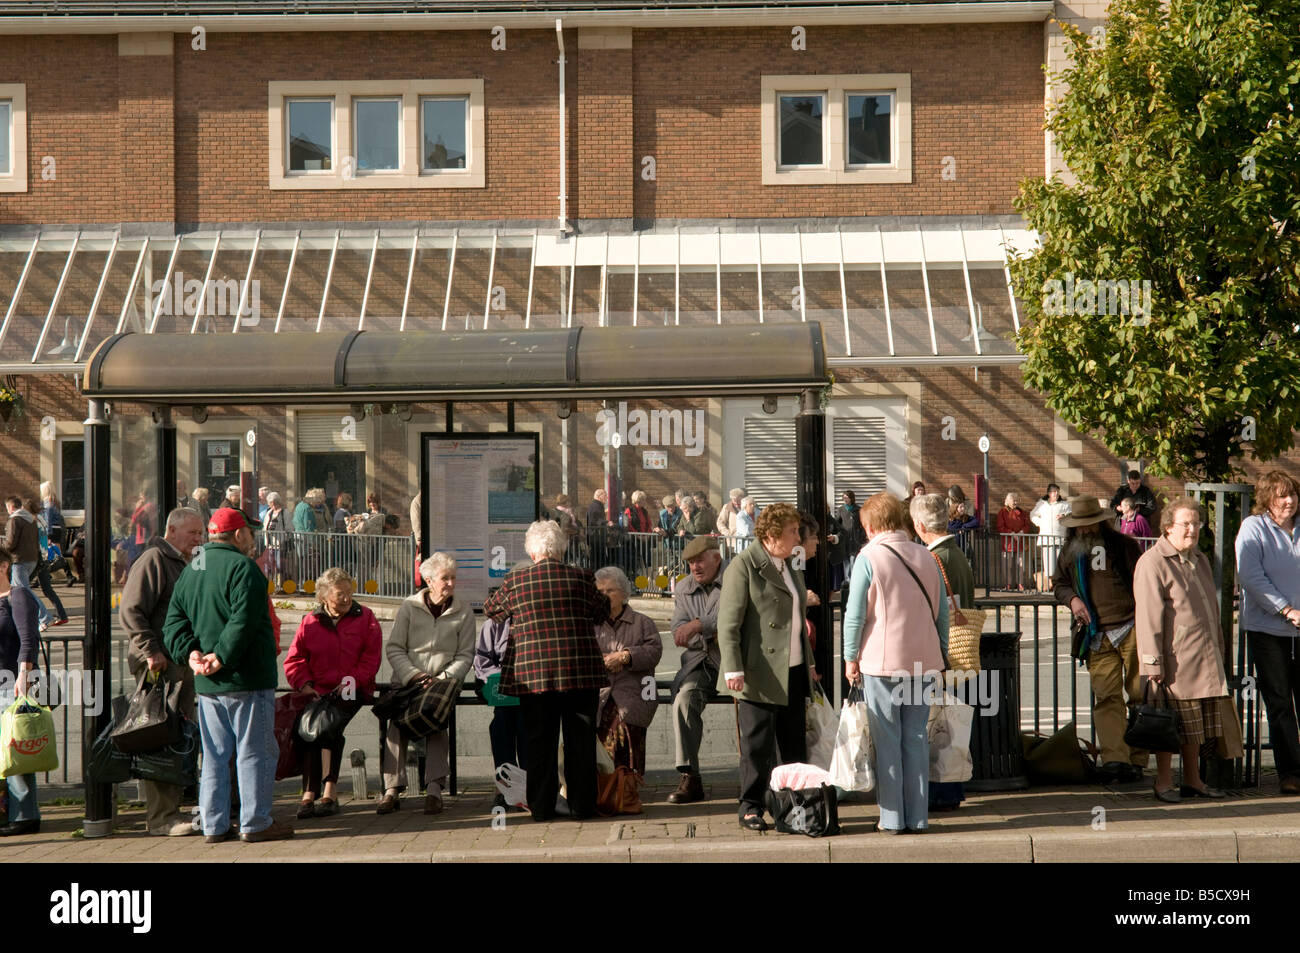 groups of People, passengers,  waiting for their buses at Carmarthen town centre bus station, Wales UK Stock Photo